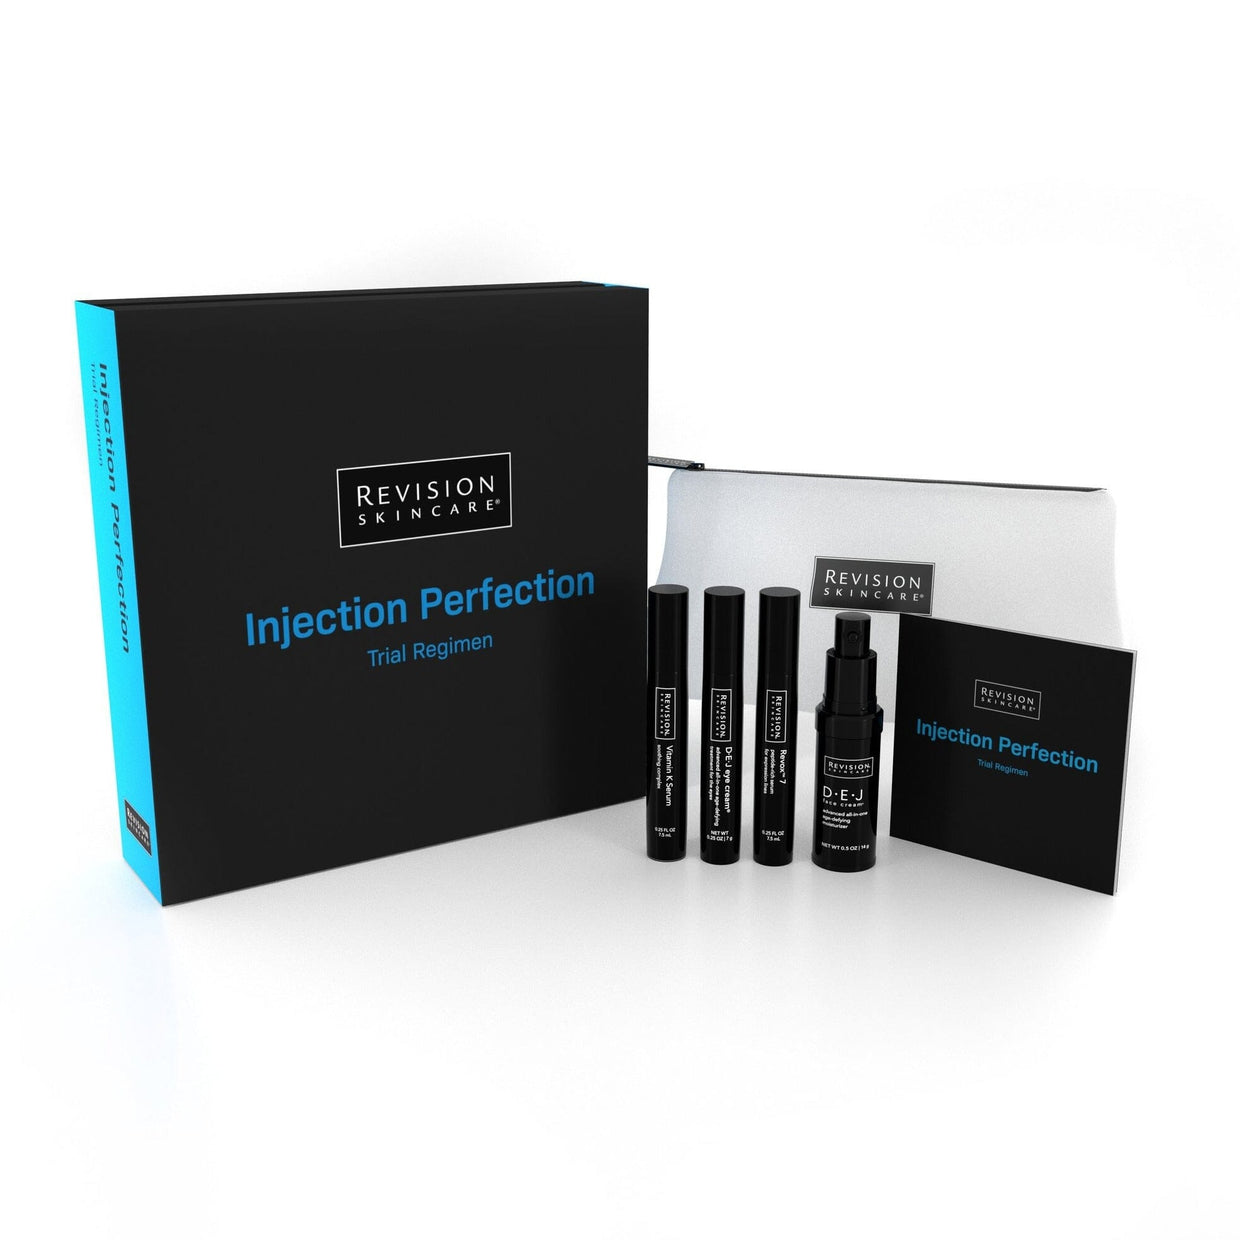 Revision Skincare Injection Perfection Trial Regimen Revision Shop at Exclusive Beauty Club